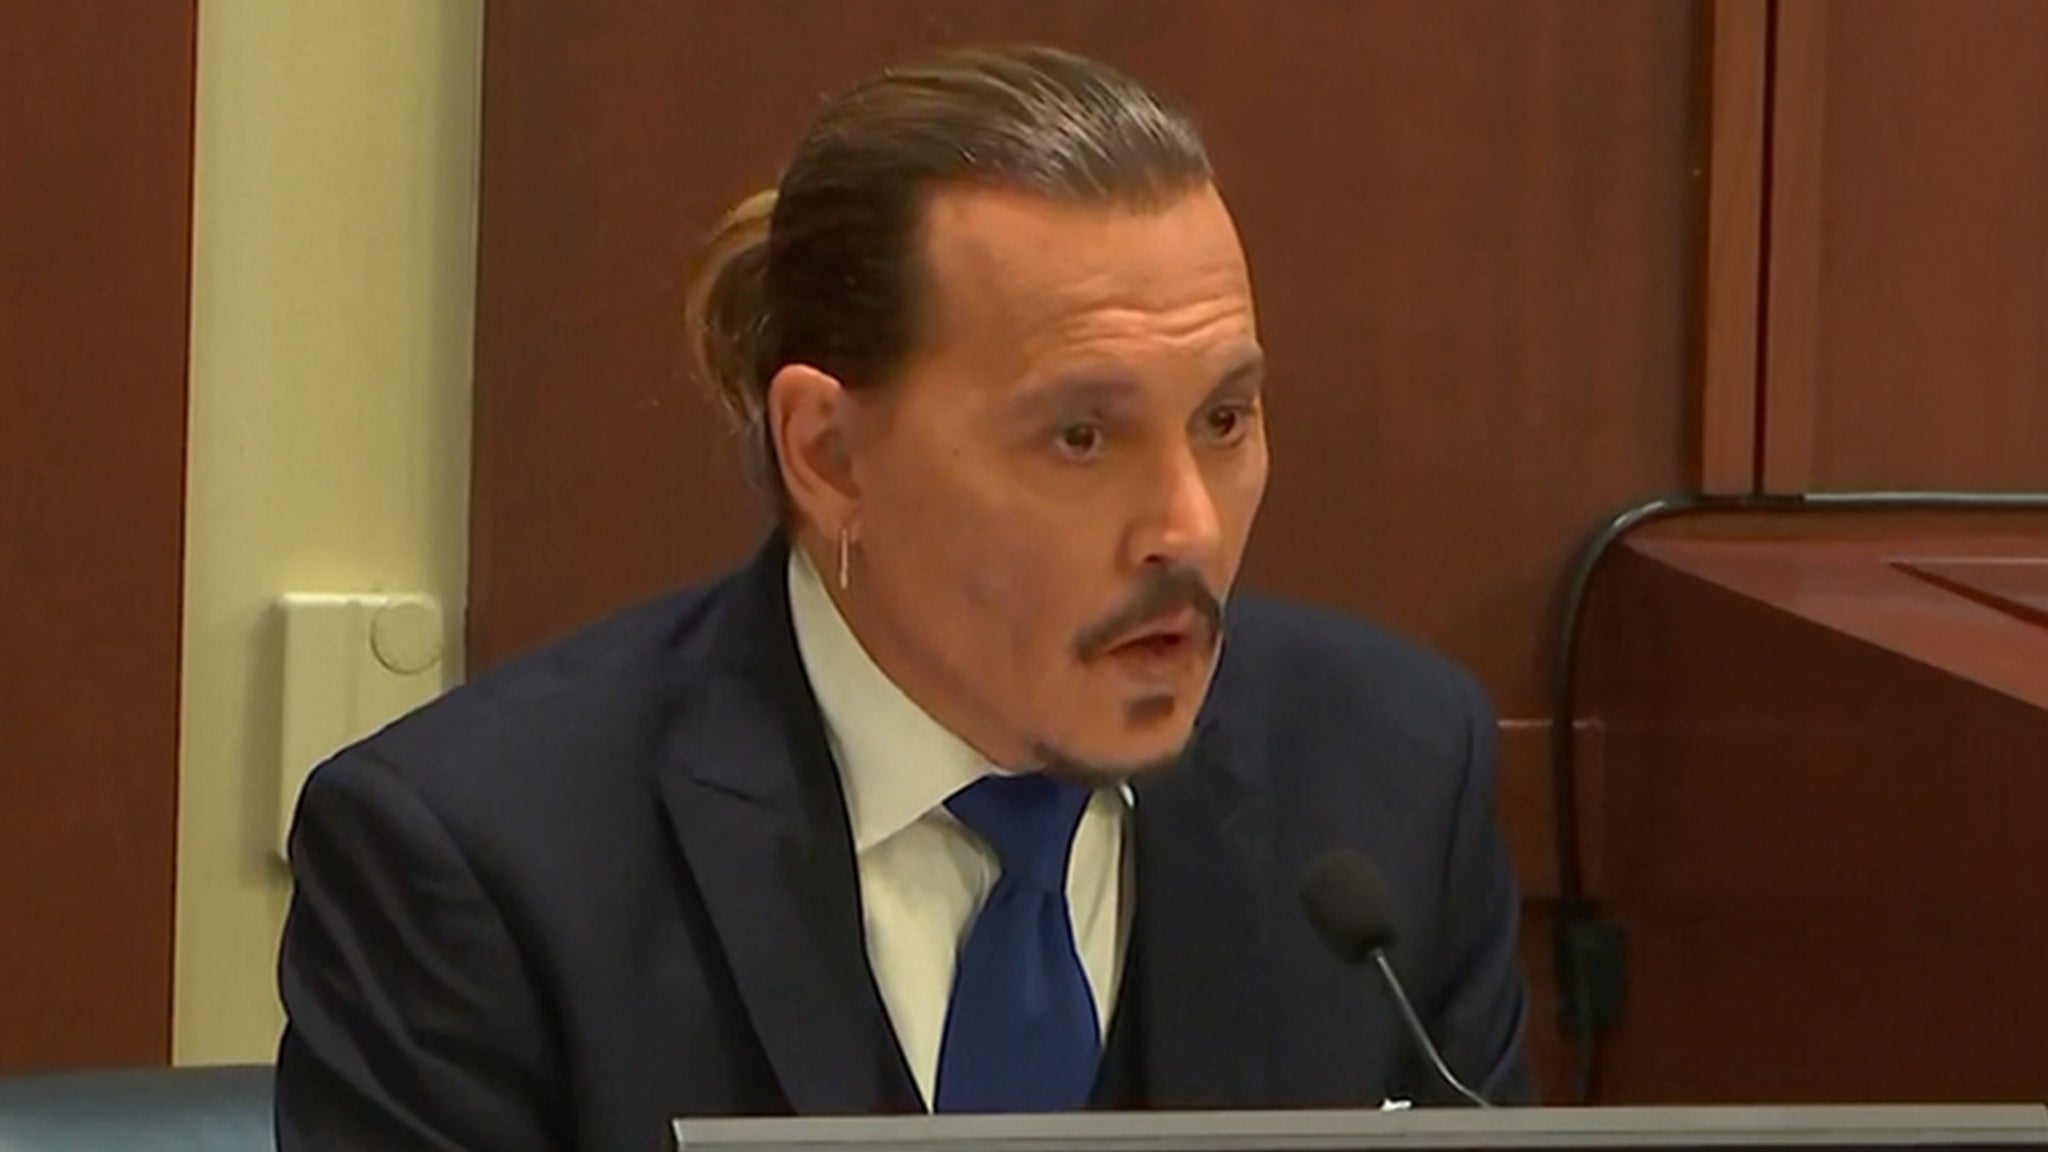 Amber Heard Accuses Johnny Depp of Putting Cigarette Out on Her, Courtroom Audio thumbnail